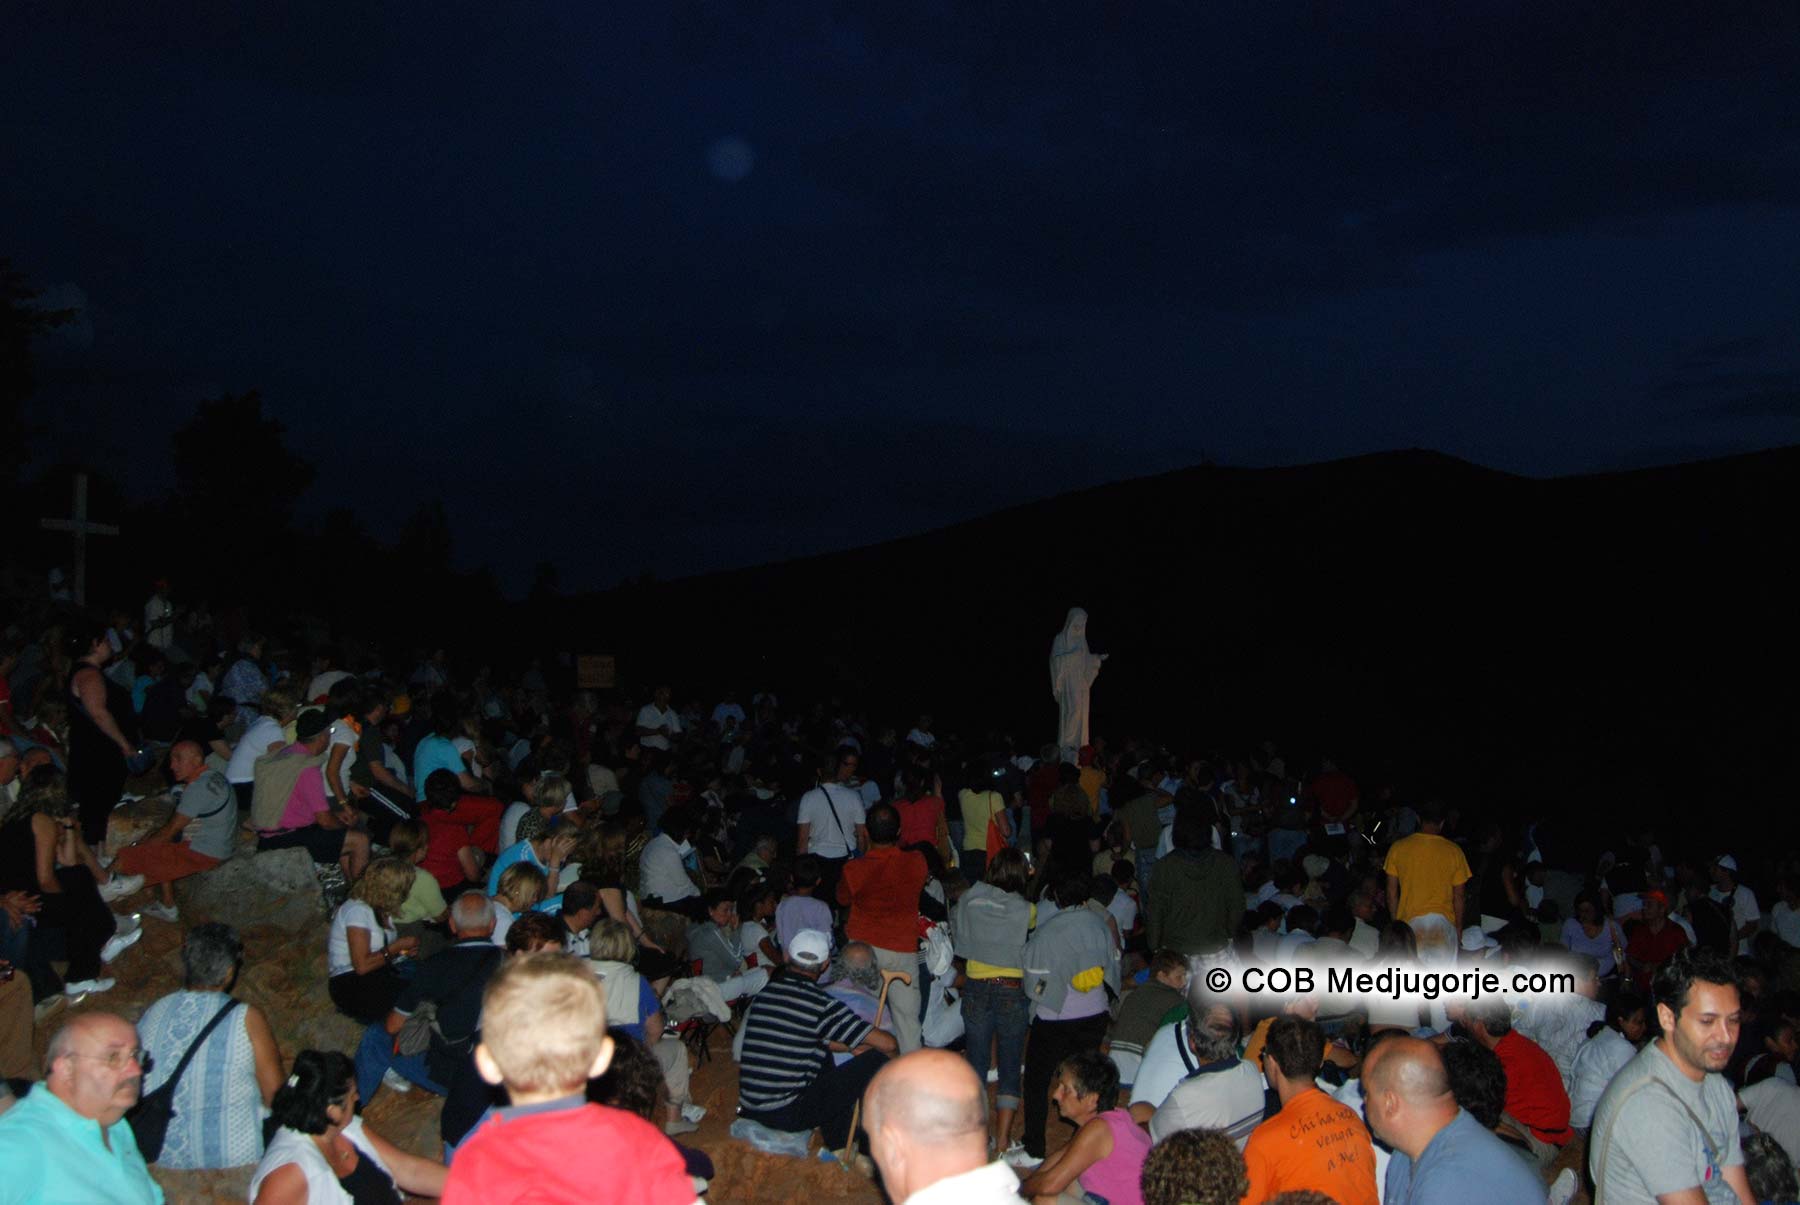 The Prayer Group This evening August 14, 2009 in Medjugorje